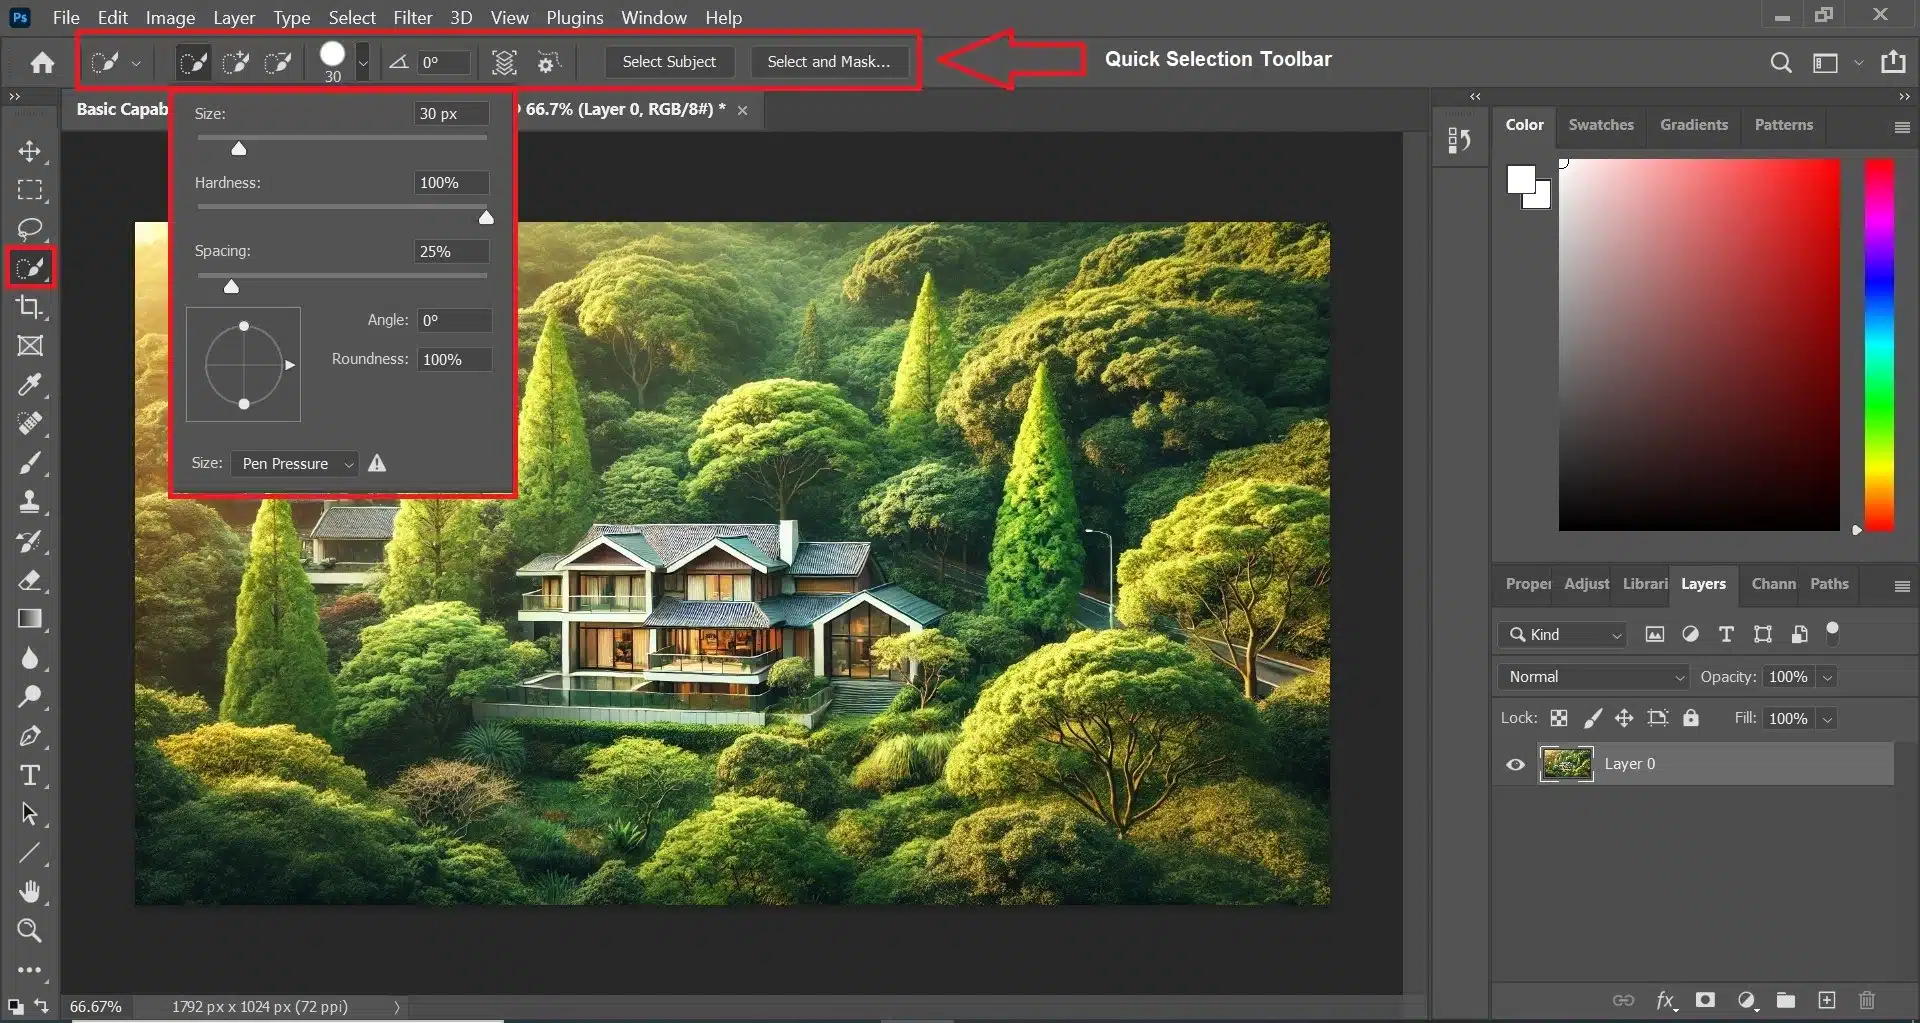 A screenshot of the Photoshop interface highlighting the Basic Capabilities of the Selection Tool and an image of a house surrounded by trees.